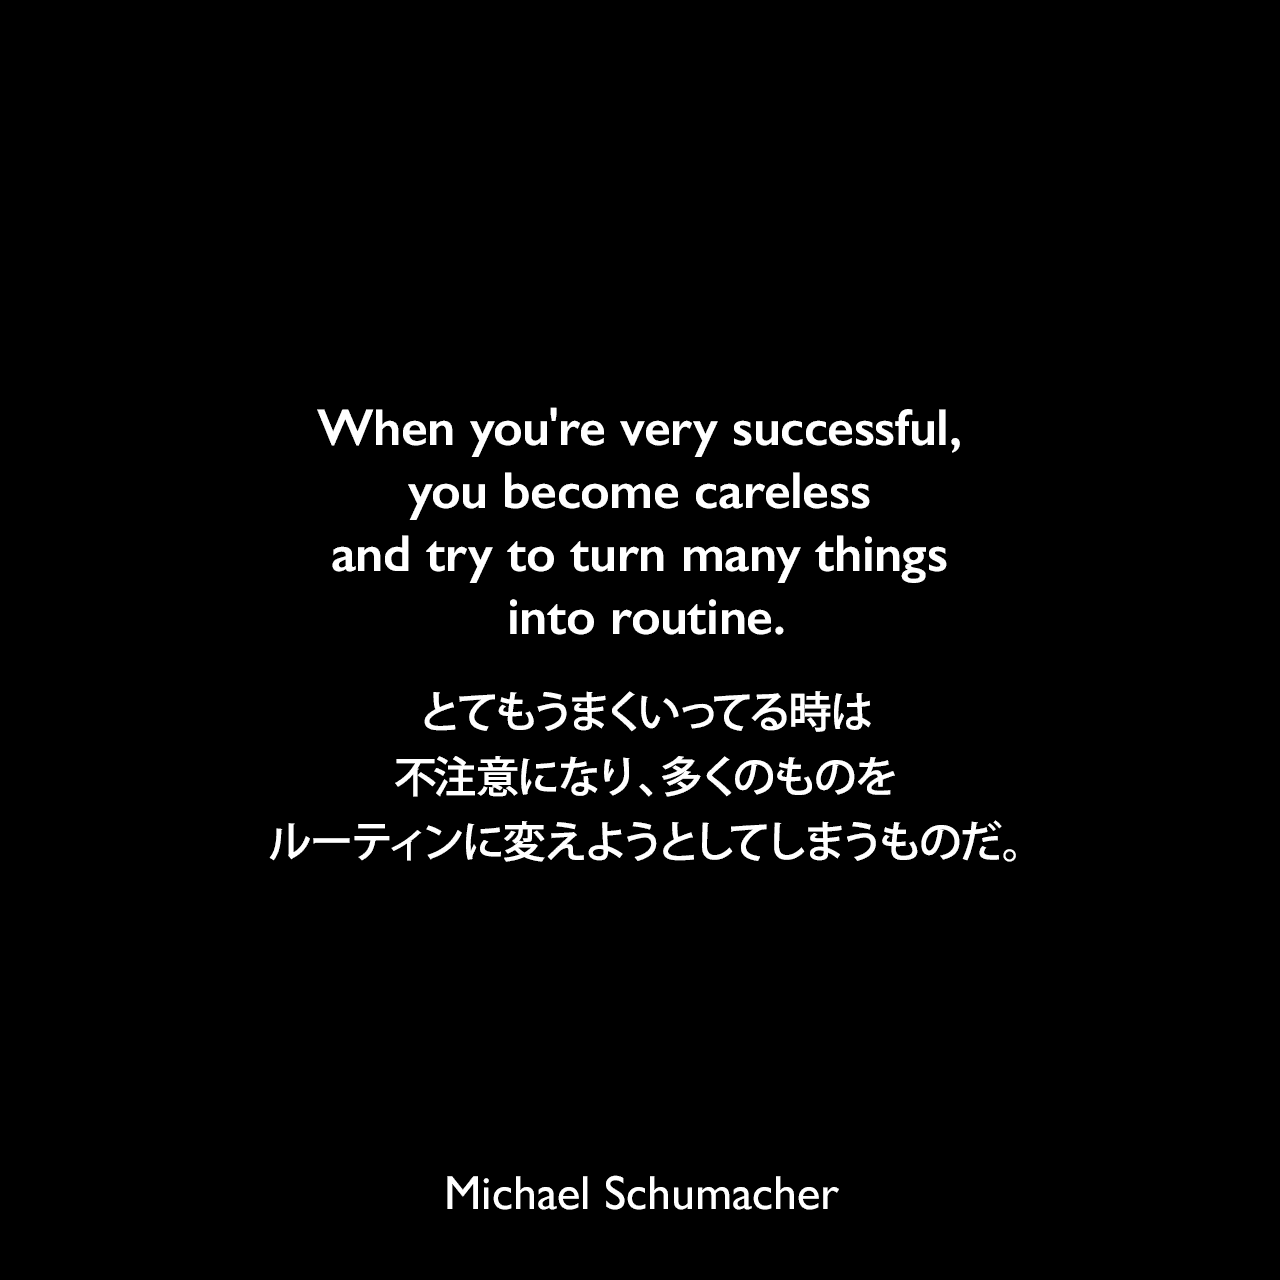 When you're very successful, you become careless and try to turn many things into routine.とてもうまくいってる時は、不注意になり、多くのものをルーティンに変えようとしてしまうものだ。Michael Schumacher